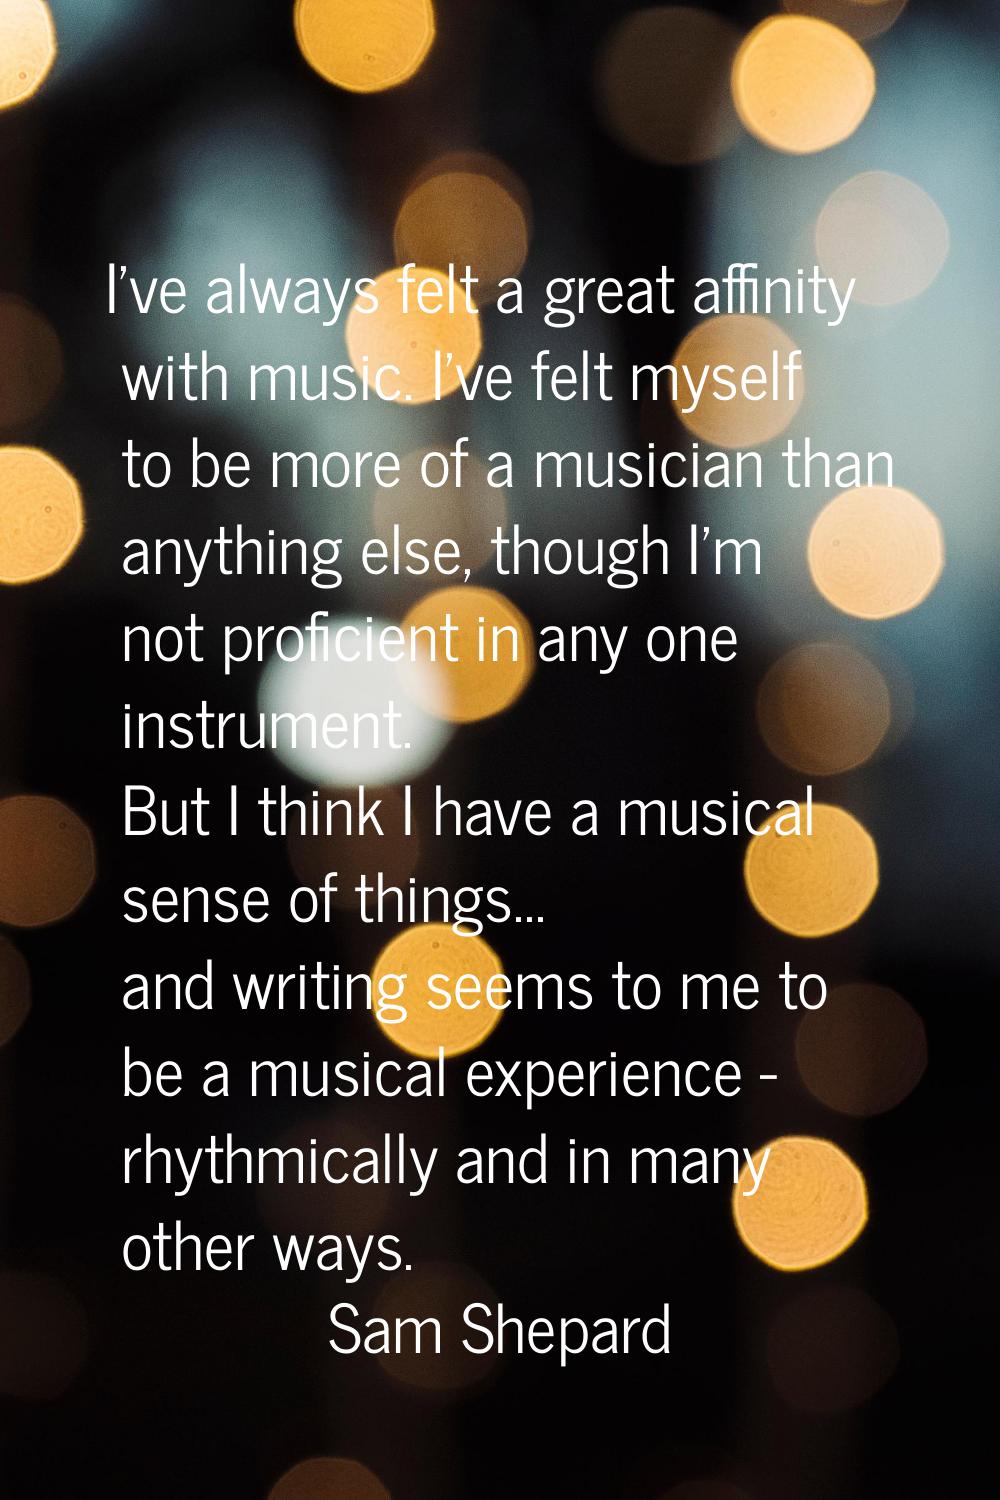 I've always felt a great affinity with music. I've felt myself to be more of a musician than anythi